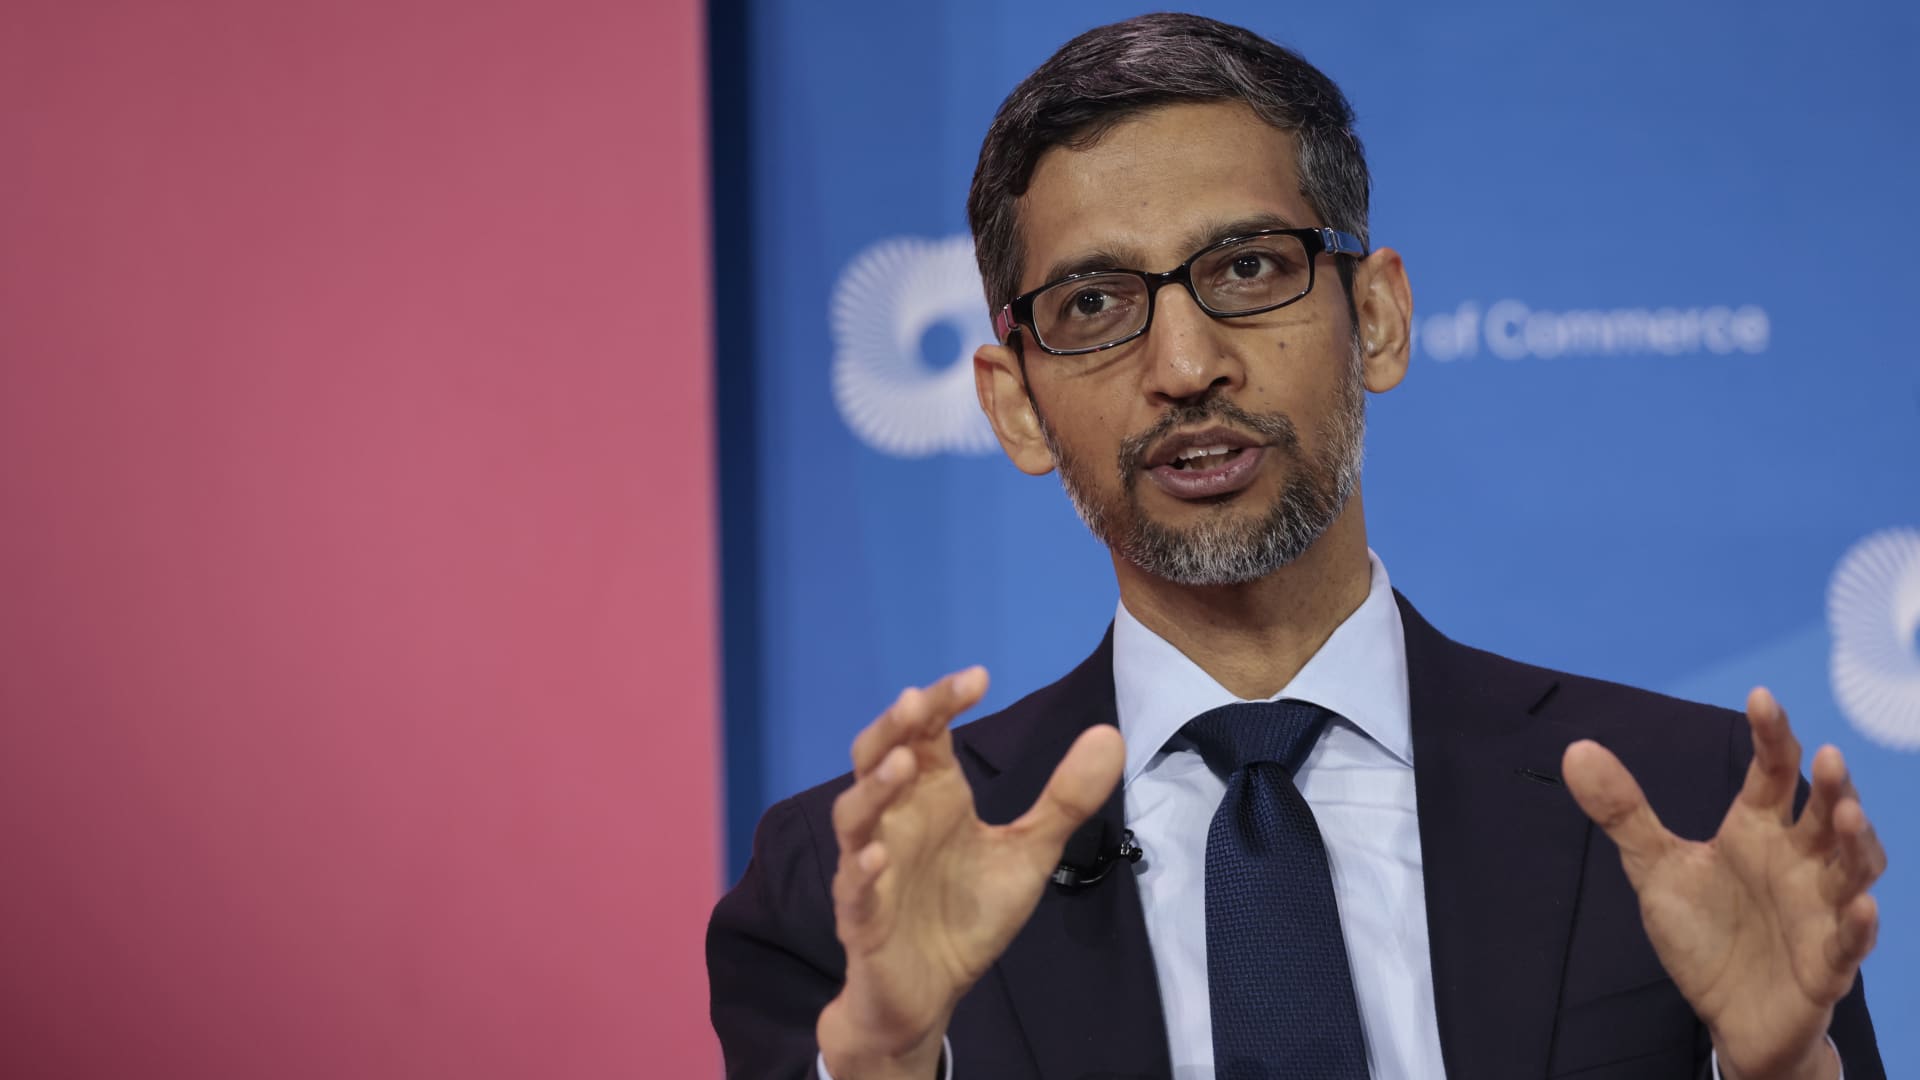 Google CEO Pichai says company will slow hiring through 2023 in memo to employees – CNBC